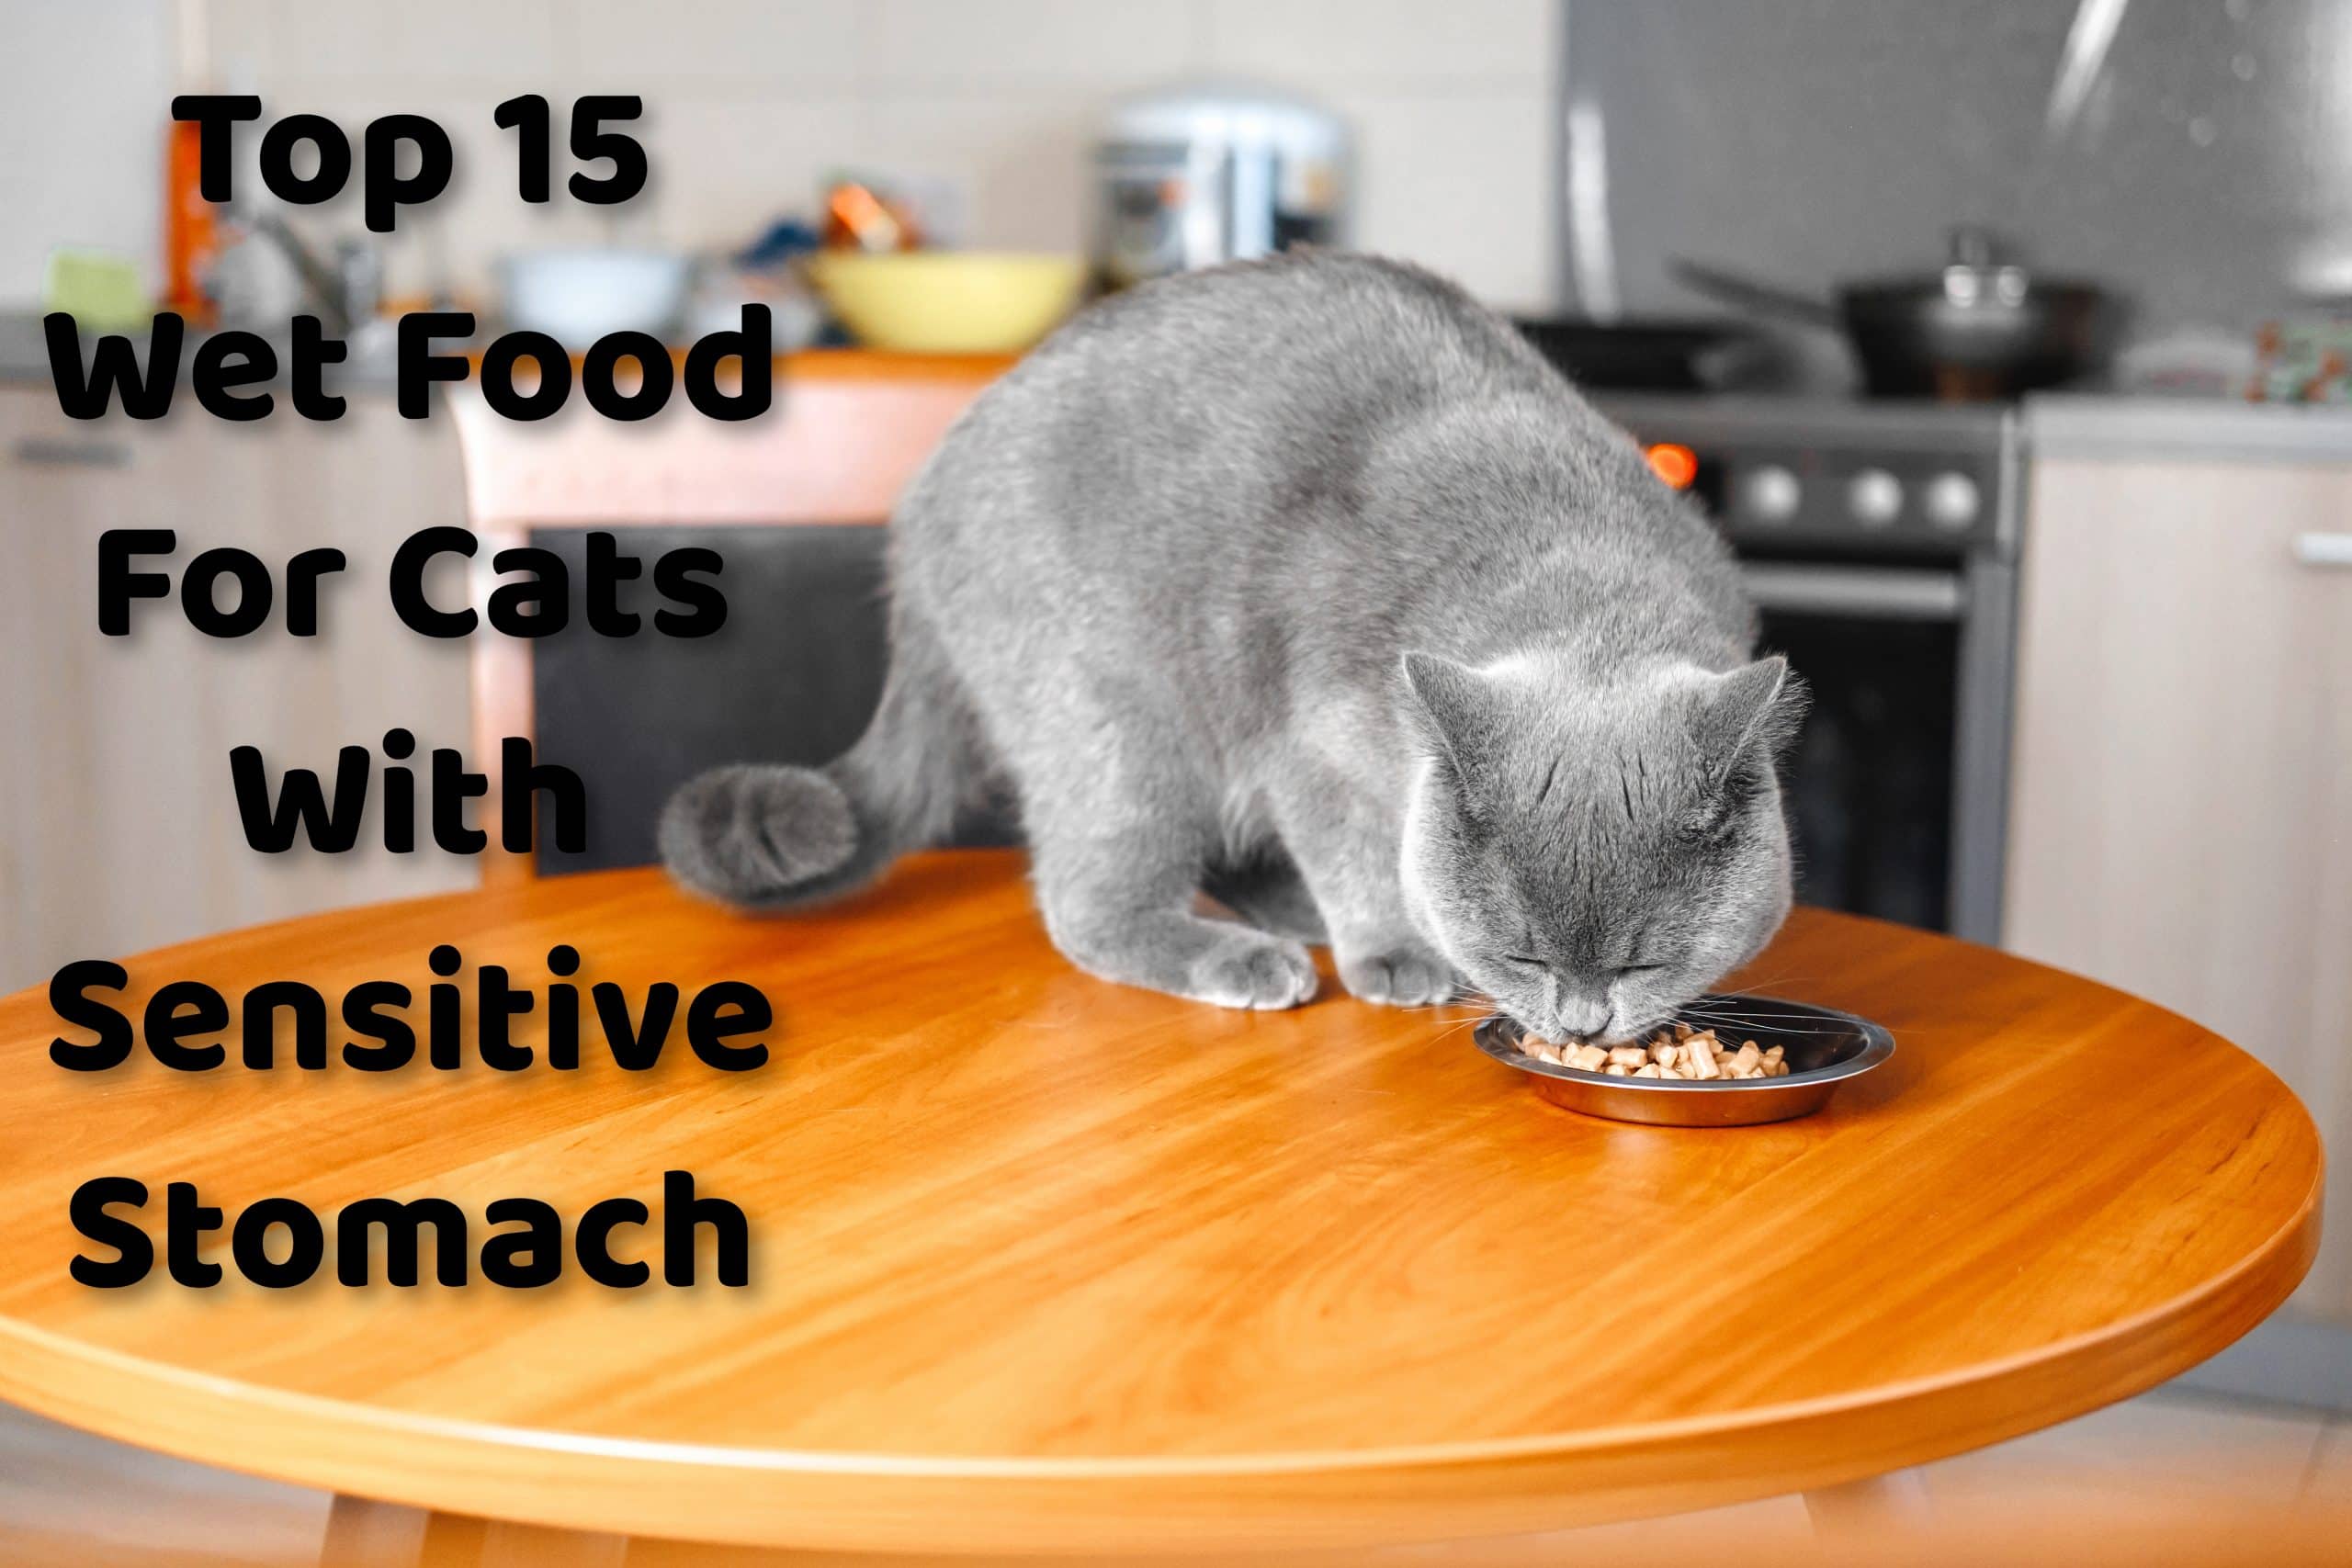 Top 15 Wet Food For Cats With Sensitive Stomach